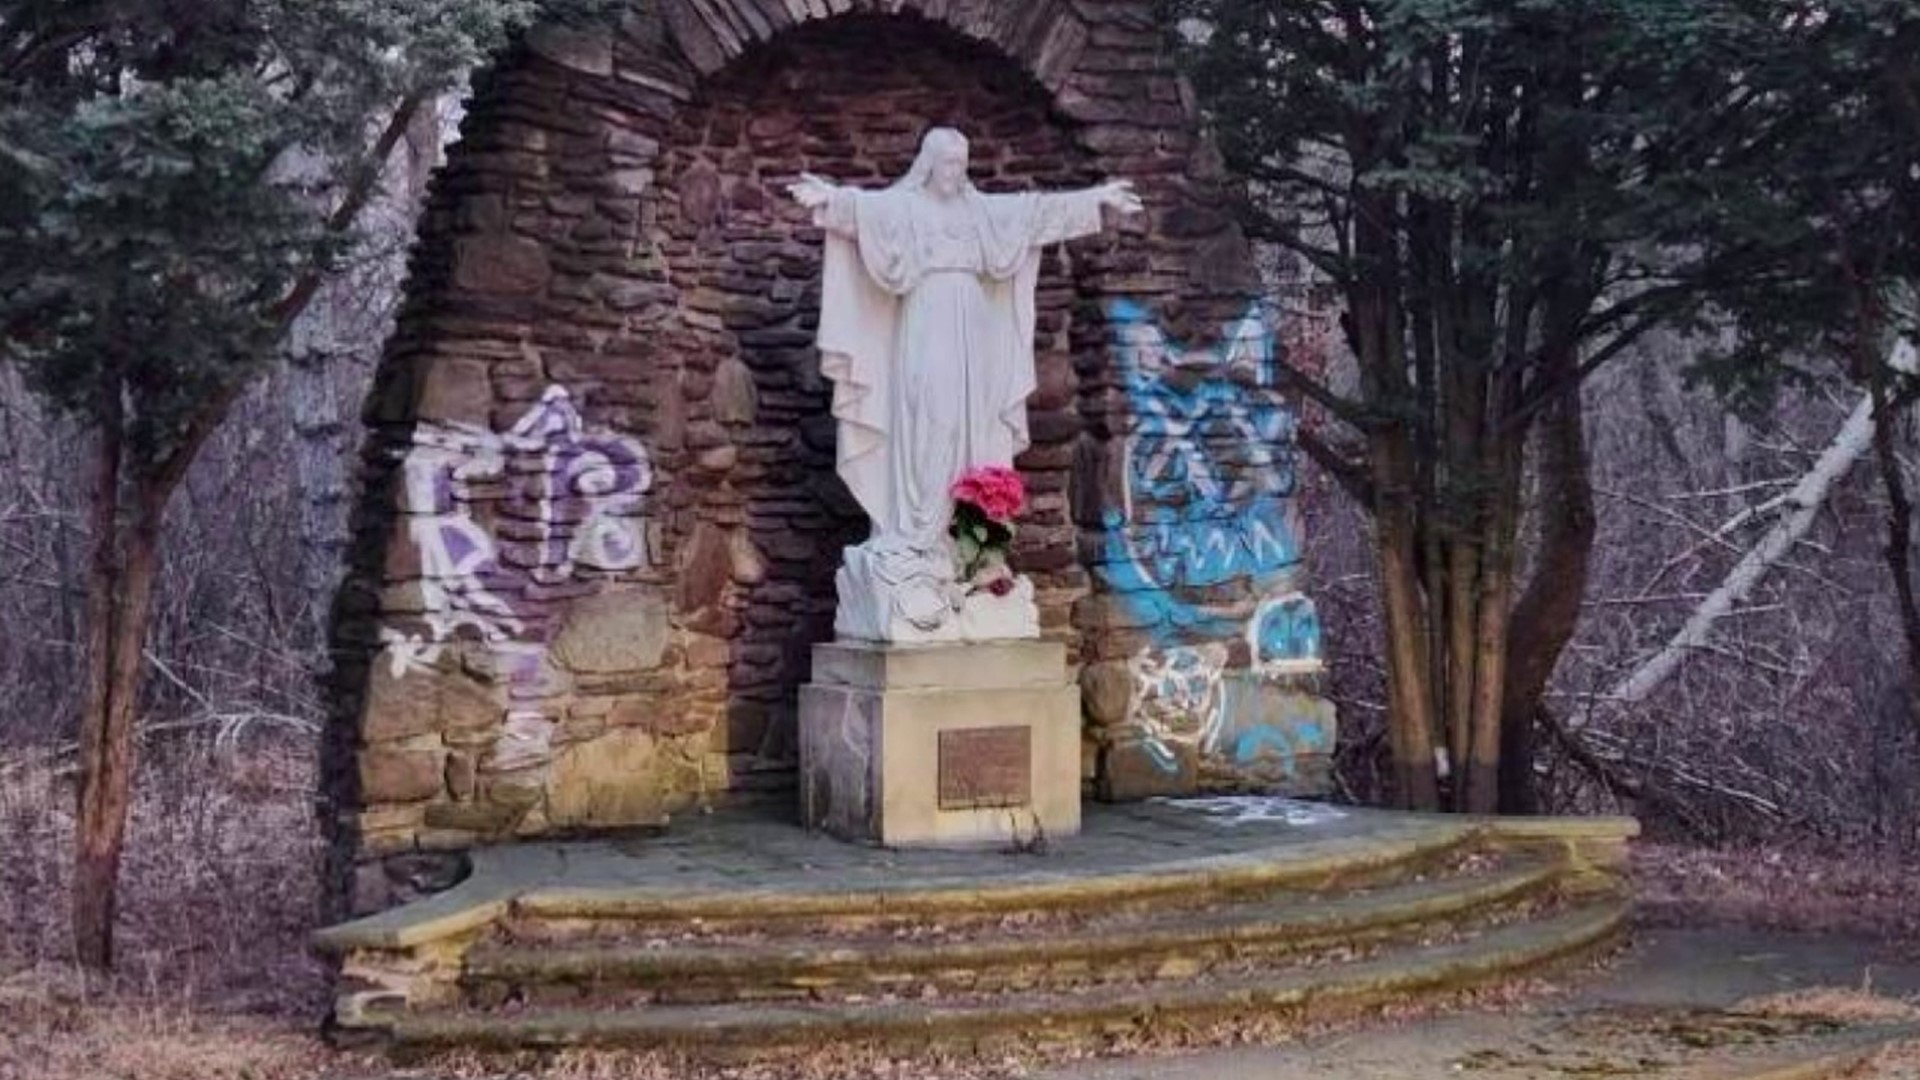 Police say the vandalism to the prominent statue happened sometime overnight Monday.